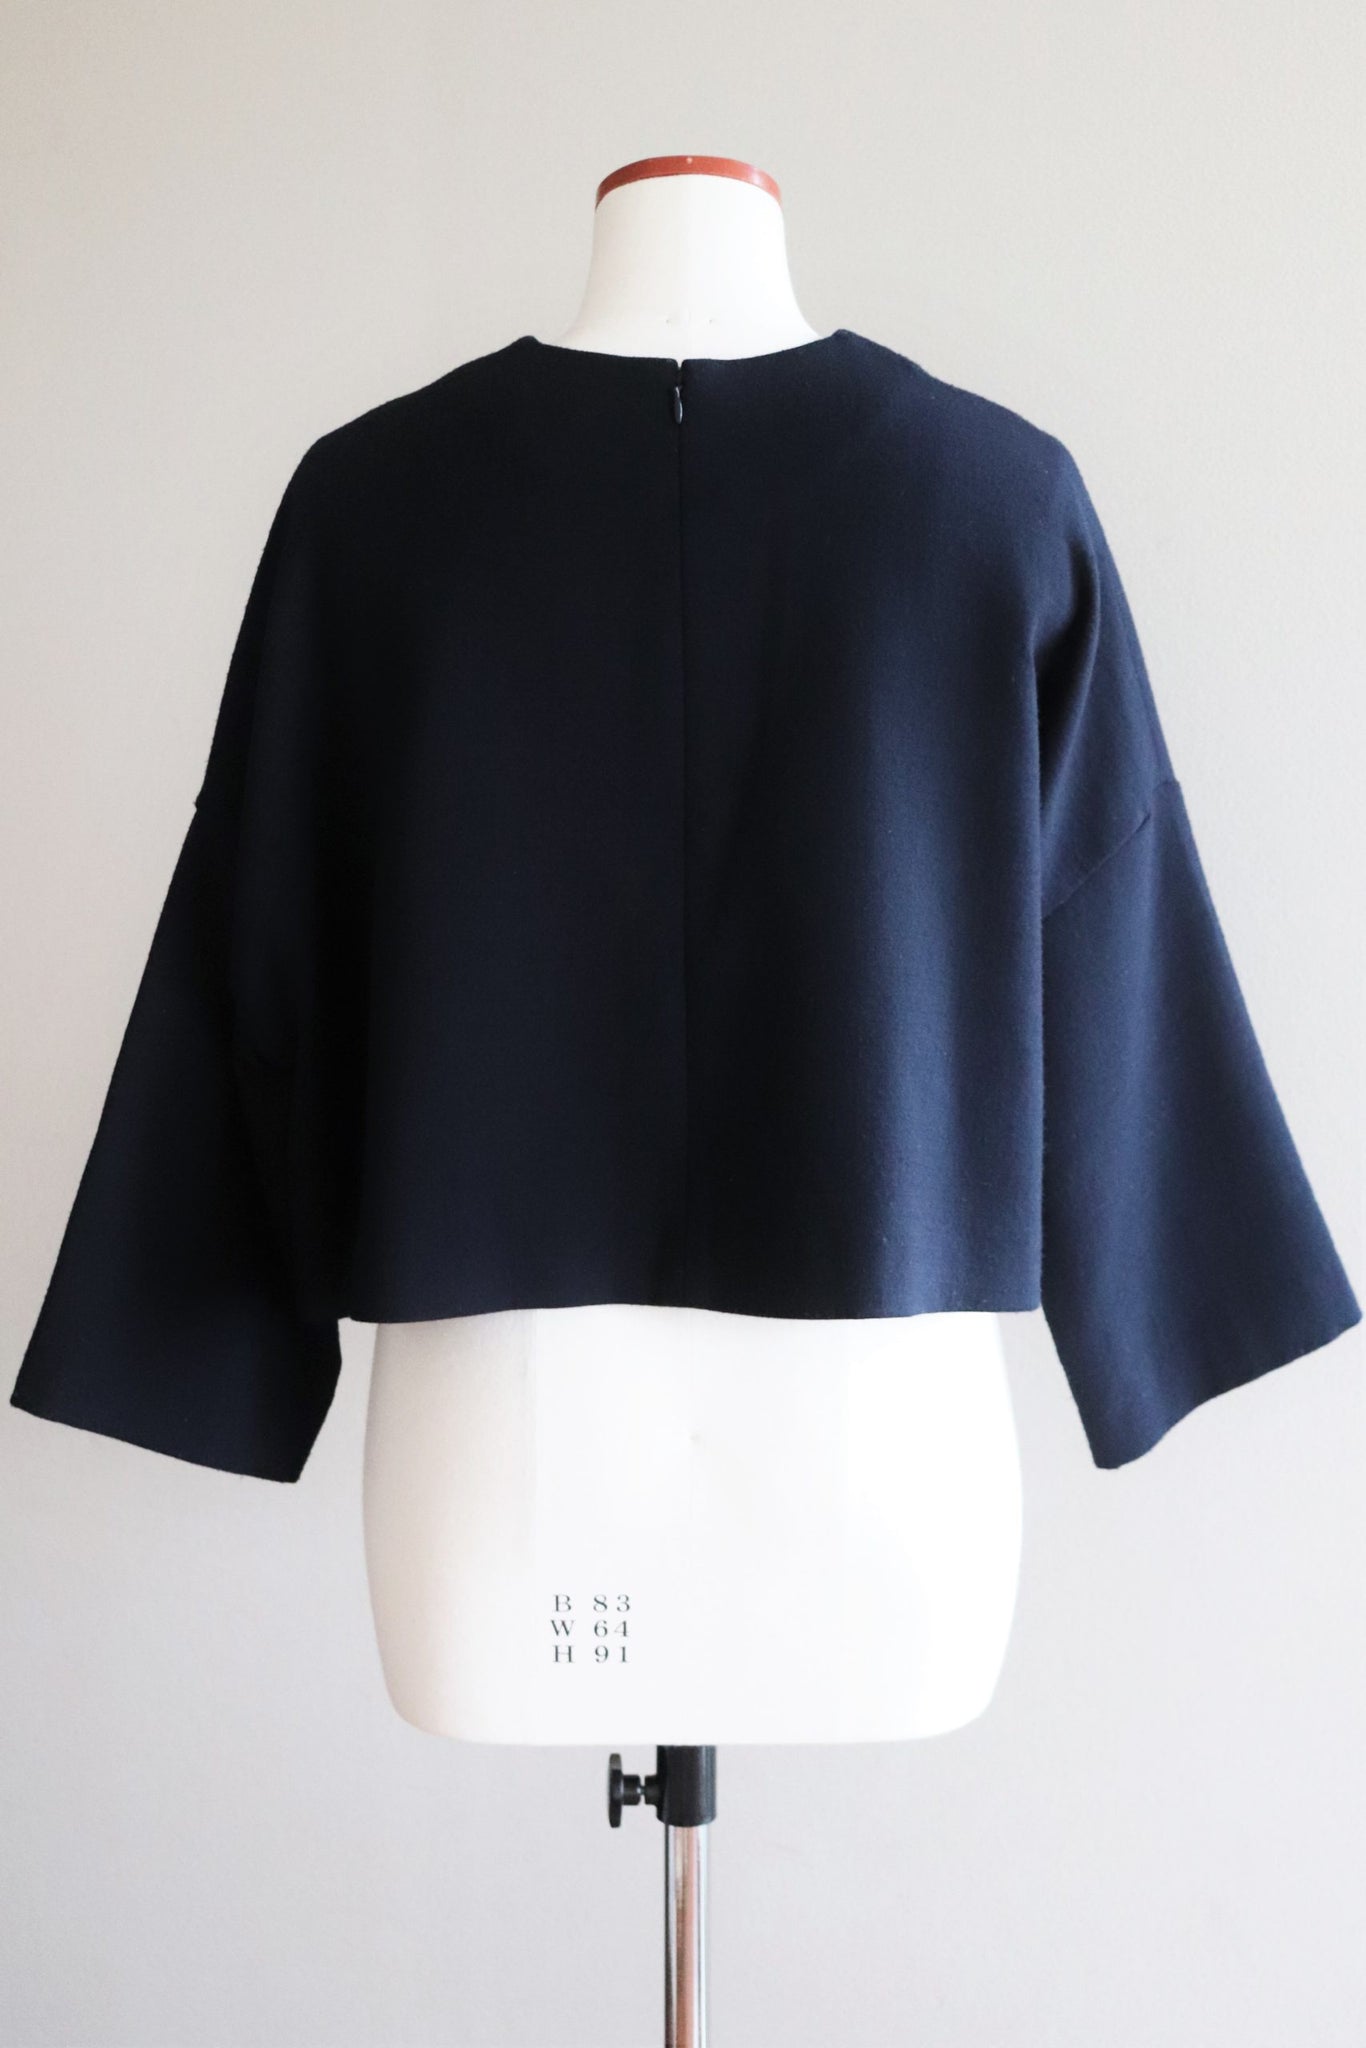 90s 100% Wool Pullover Top Made In France